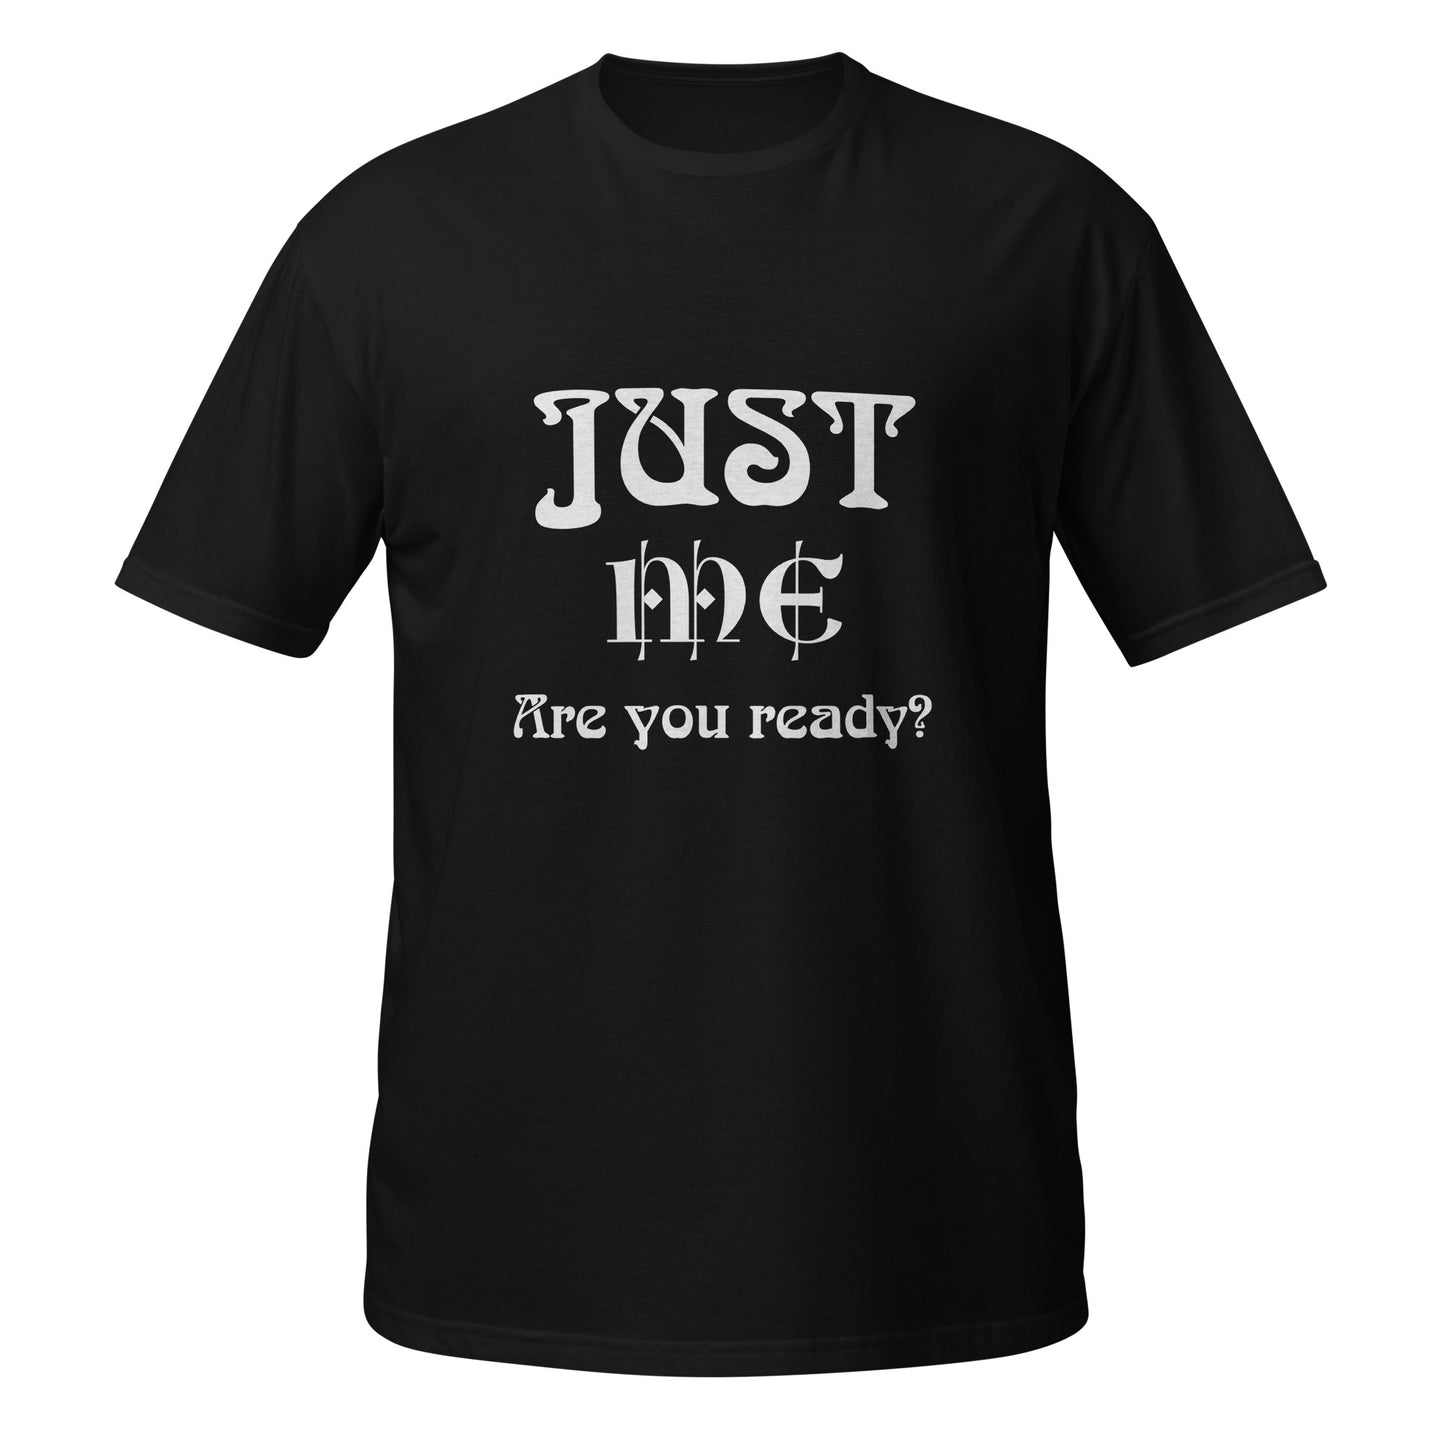 Just me! Are you ready? Short-Sleeve Unisex T-Shirt